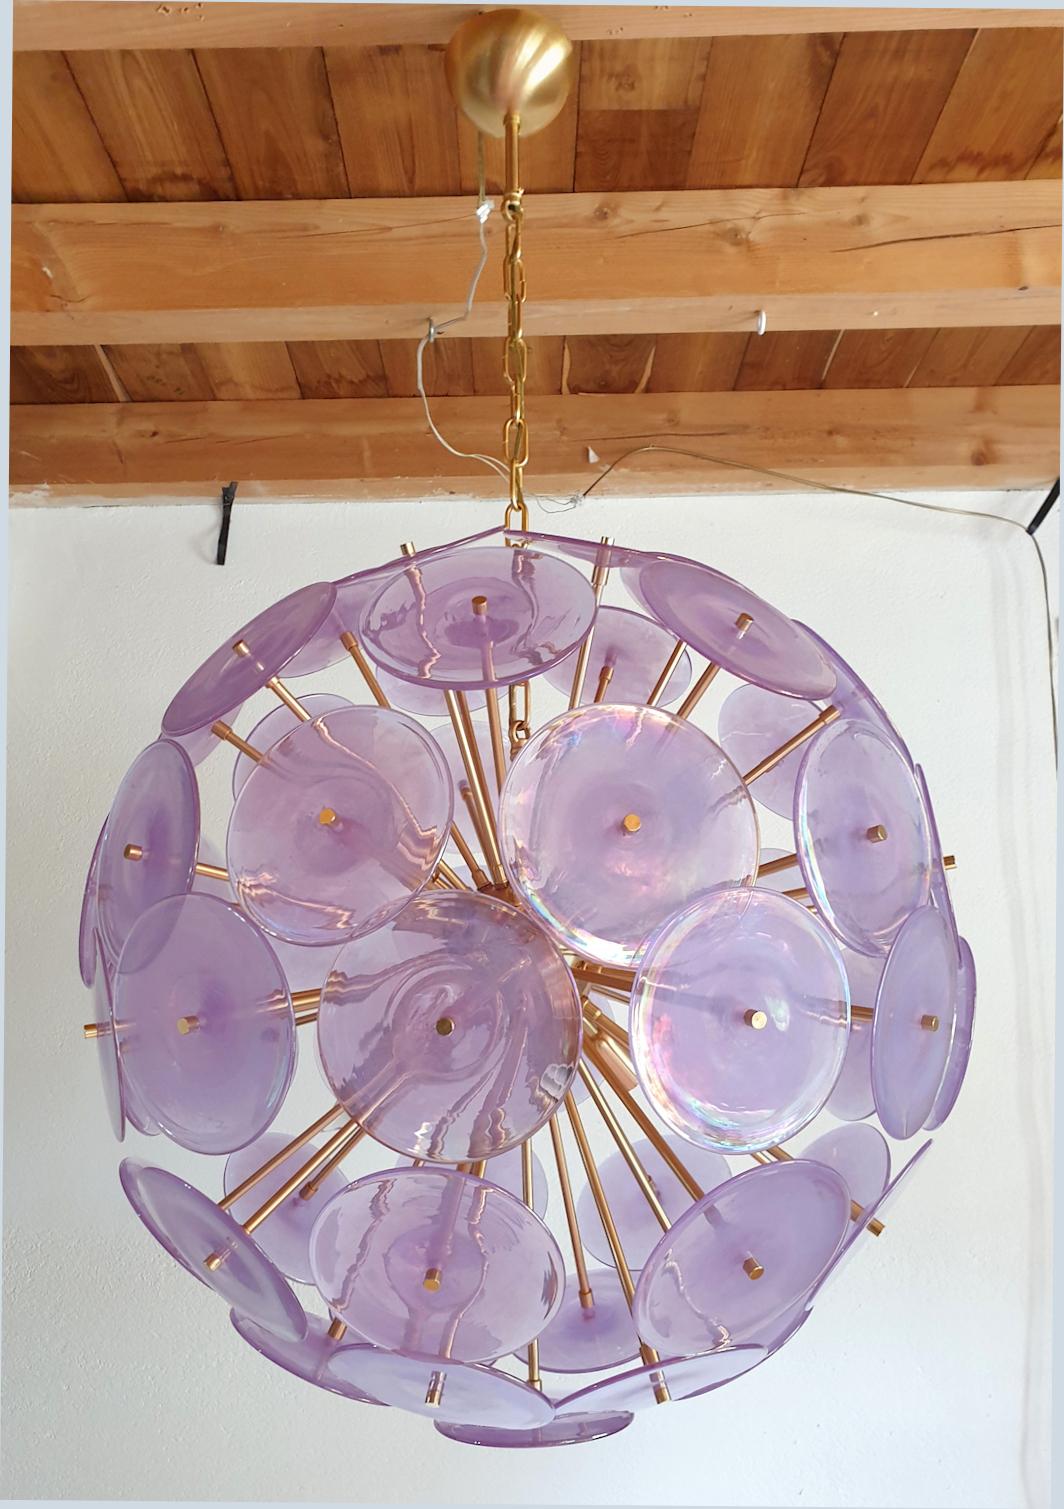 Large round Mid-Century Modern murano glass Sputnik chandelier, attributed to Vistosi, Italy circa 1980s.
The vintage chandelier is made of brass center ball, stems, chain & canopy and light purple iridescent hand blown Murano glass discs.
The